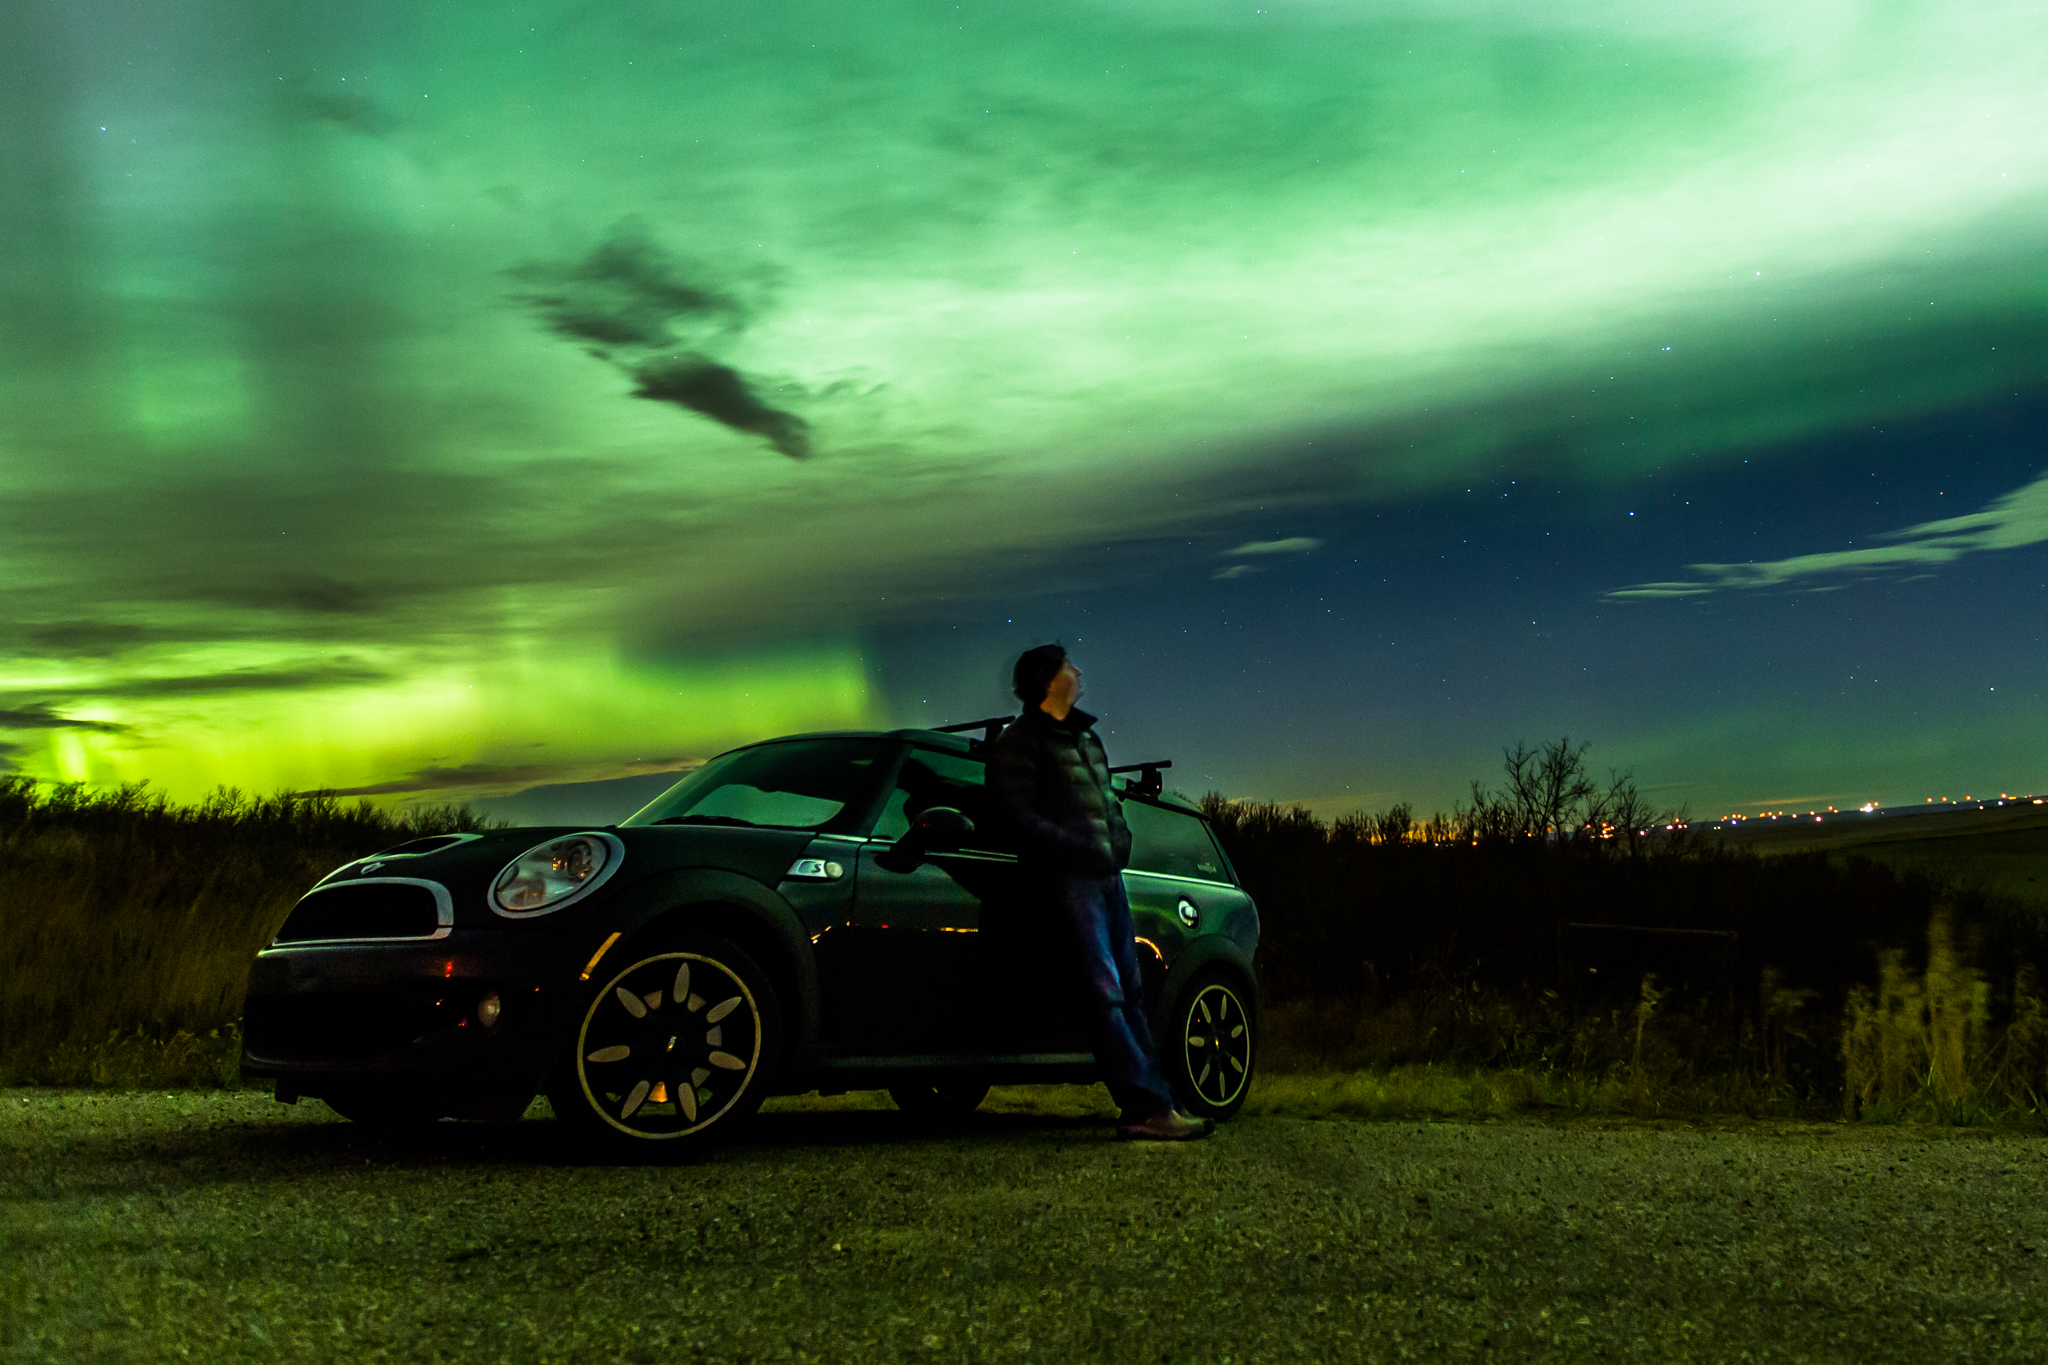 Aurora chaser Chris Ratzlaff leans against a car while looking up at an aurora-filled night sky